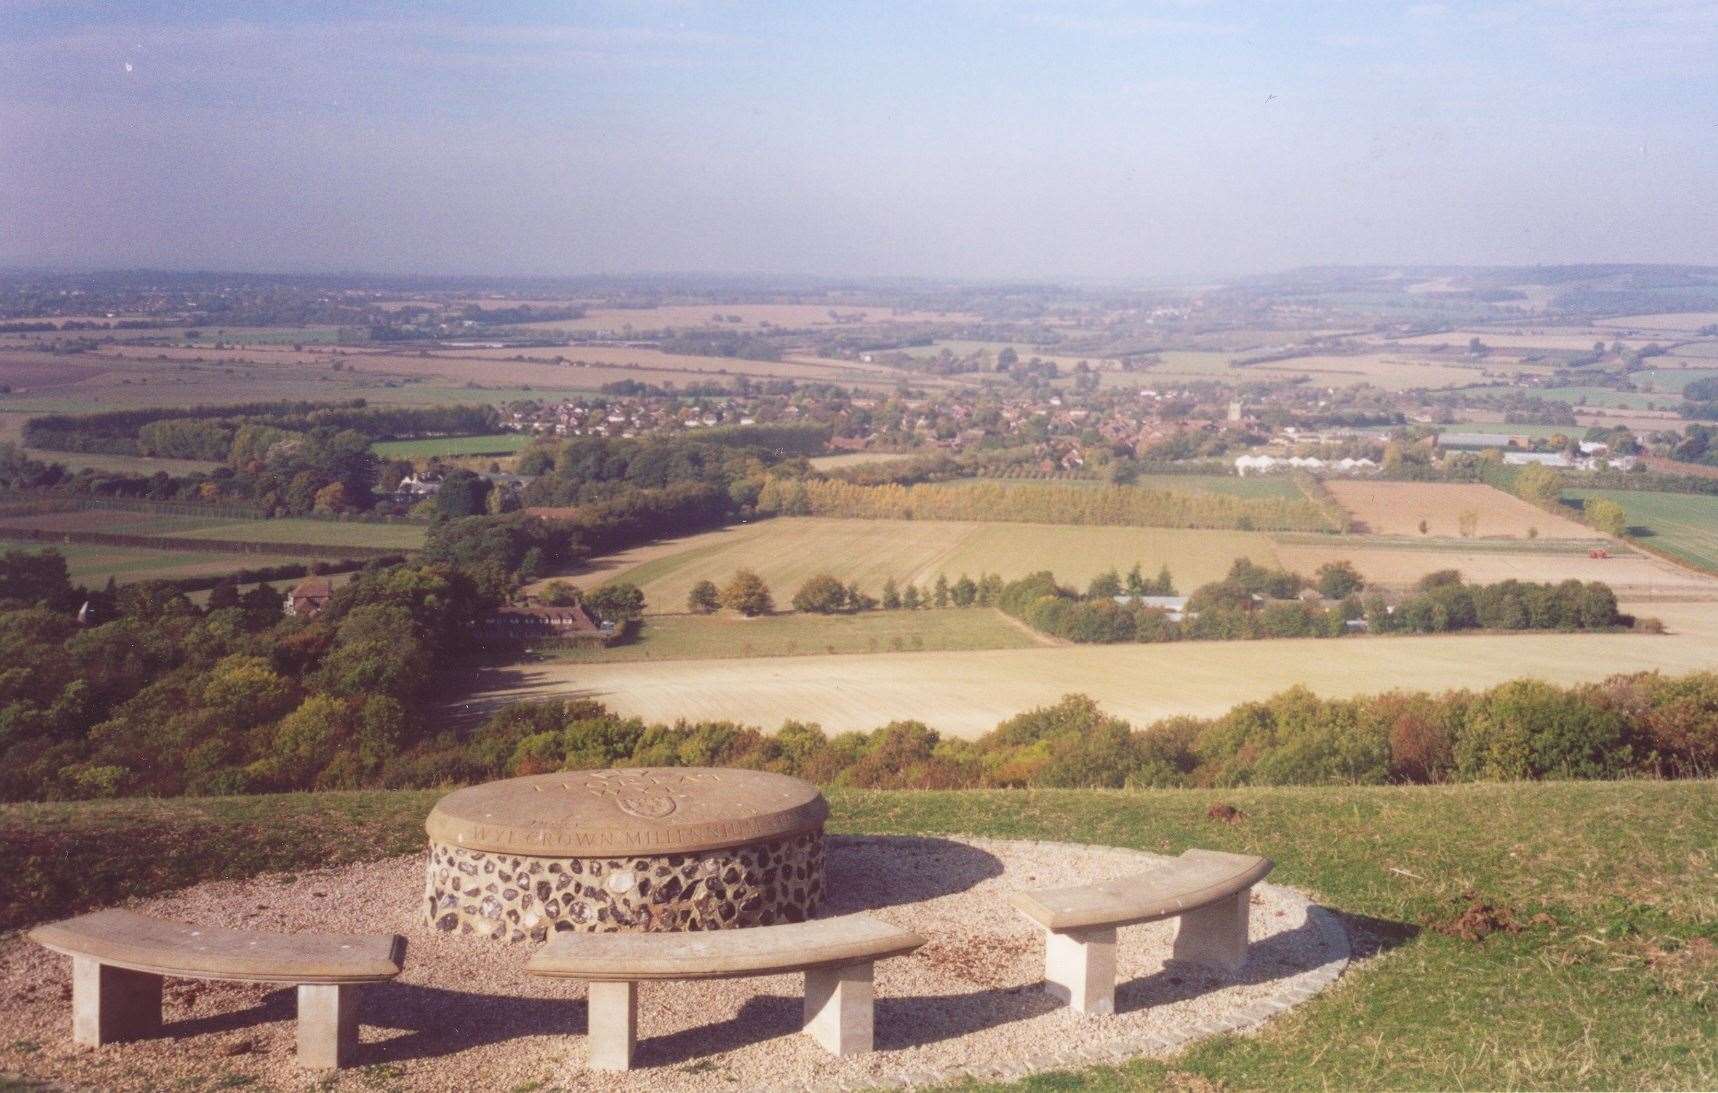 The view from the top of Wye Crown in 2003